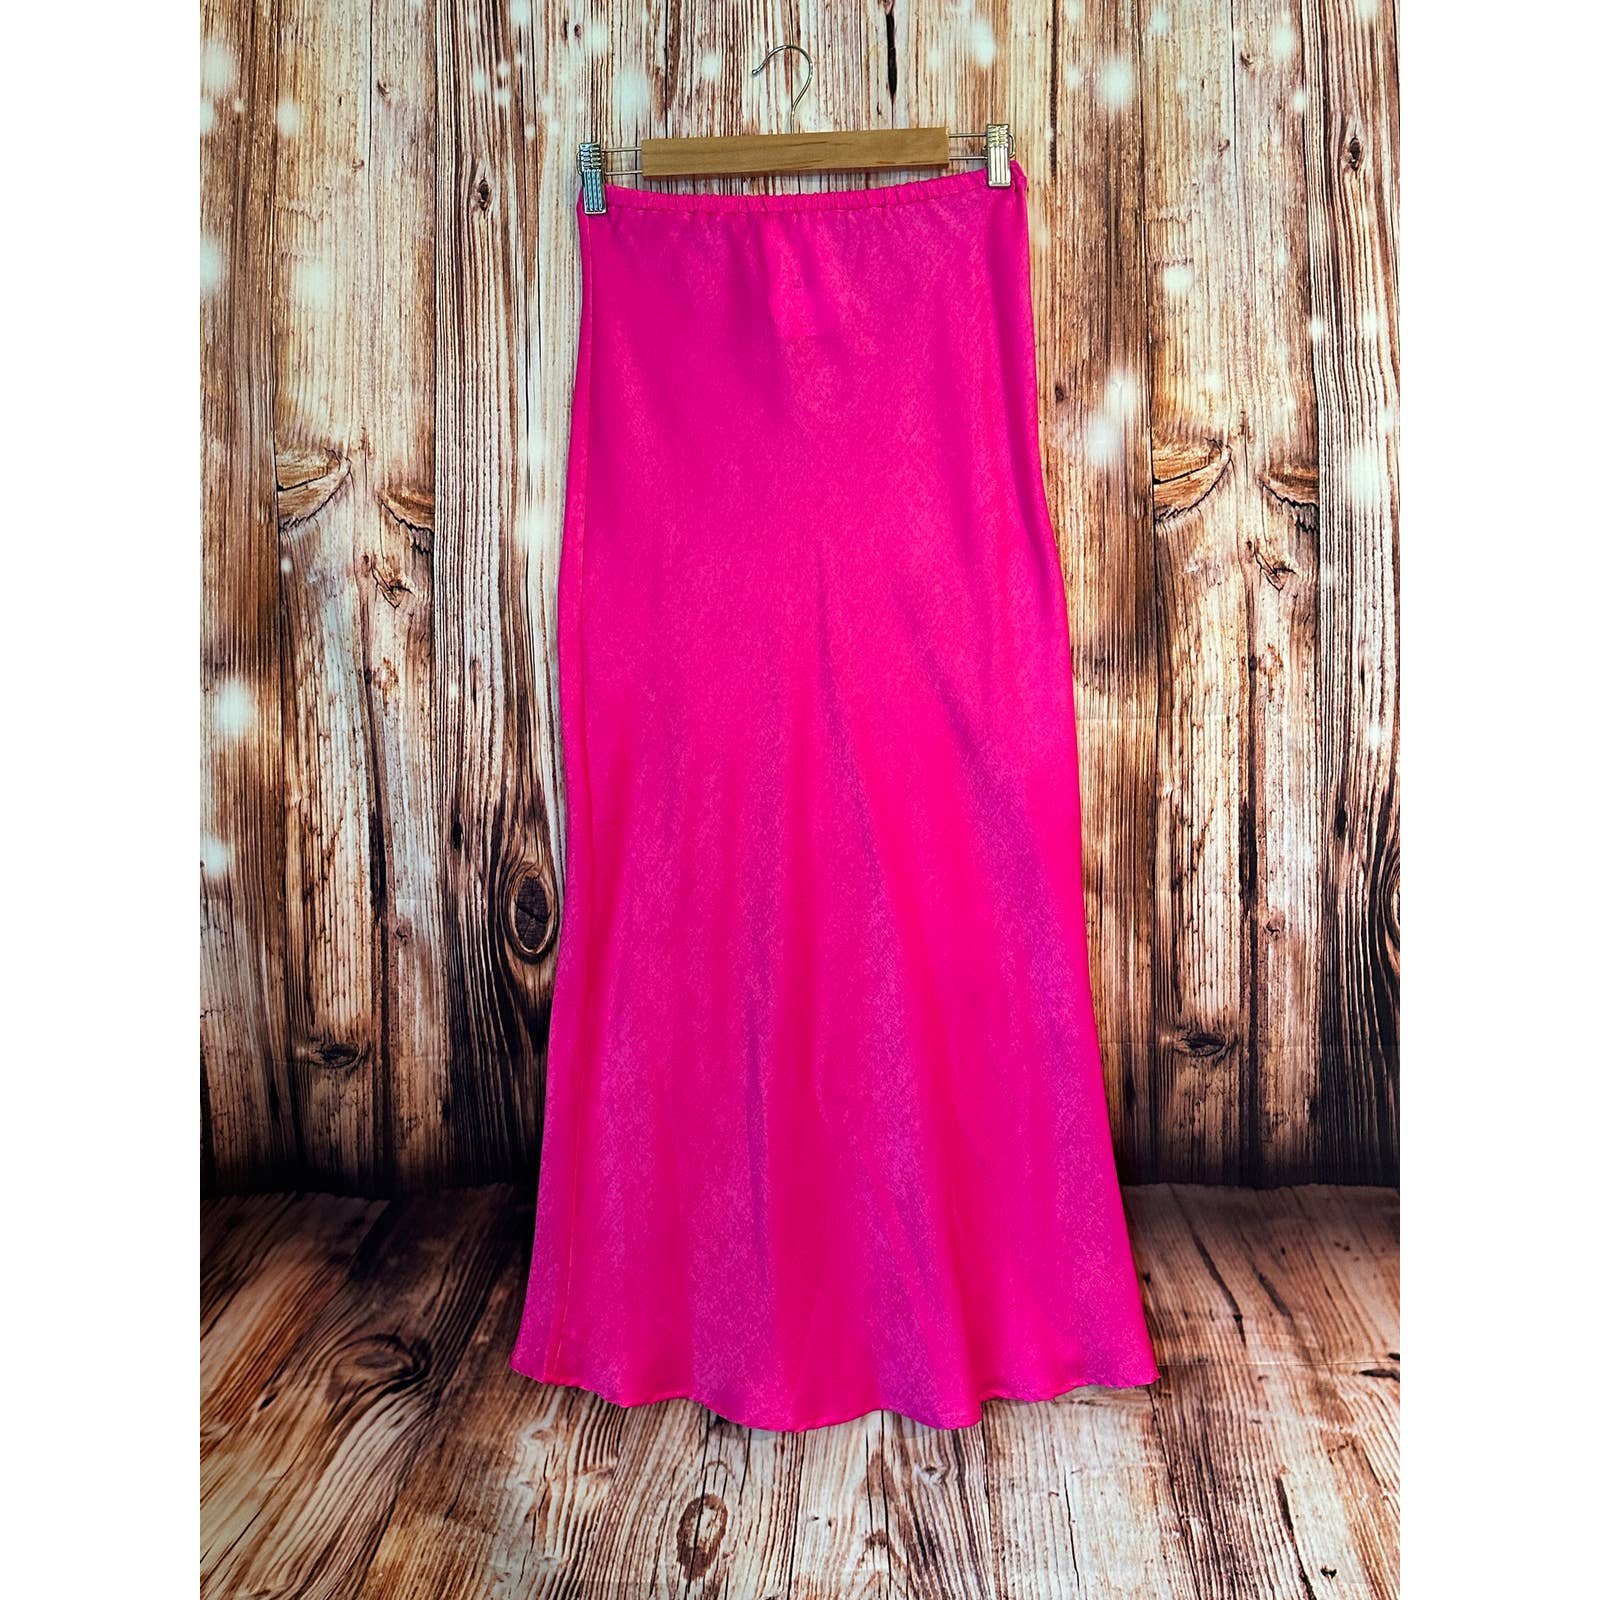 High quality NWT Women´s Boutique Small Hot Pink L